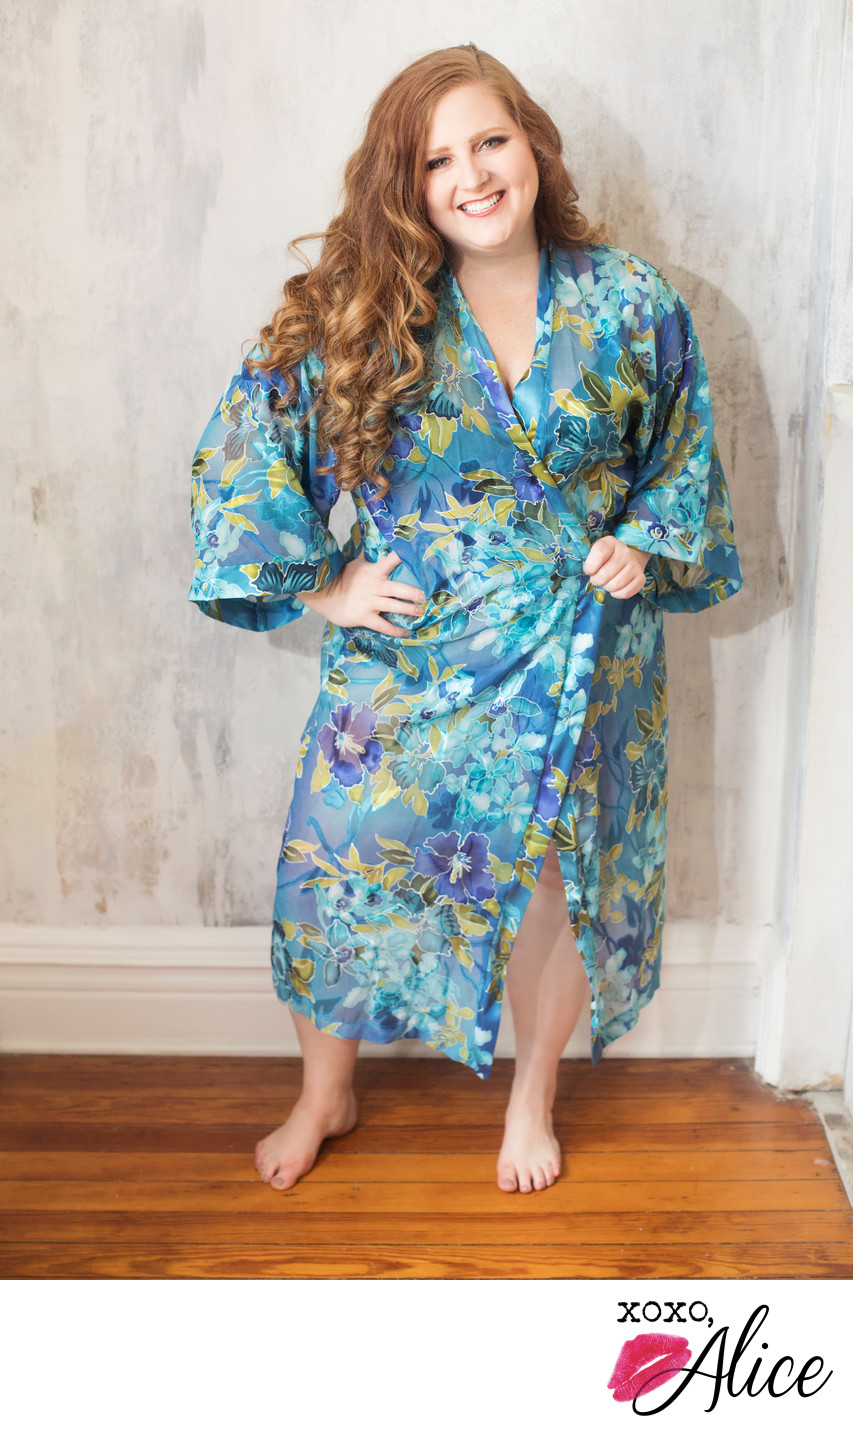 Borrow this beautiful Floral Robe for your glamour shot